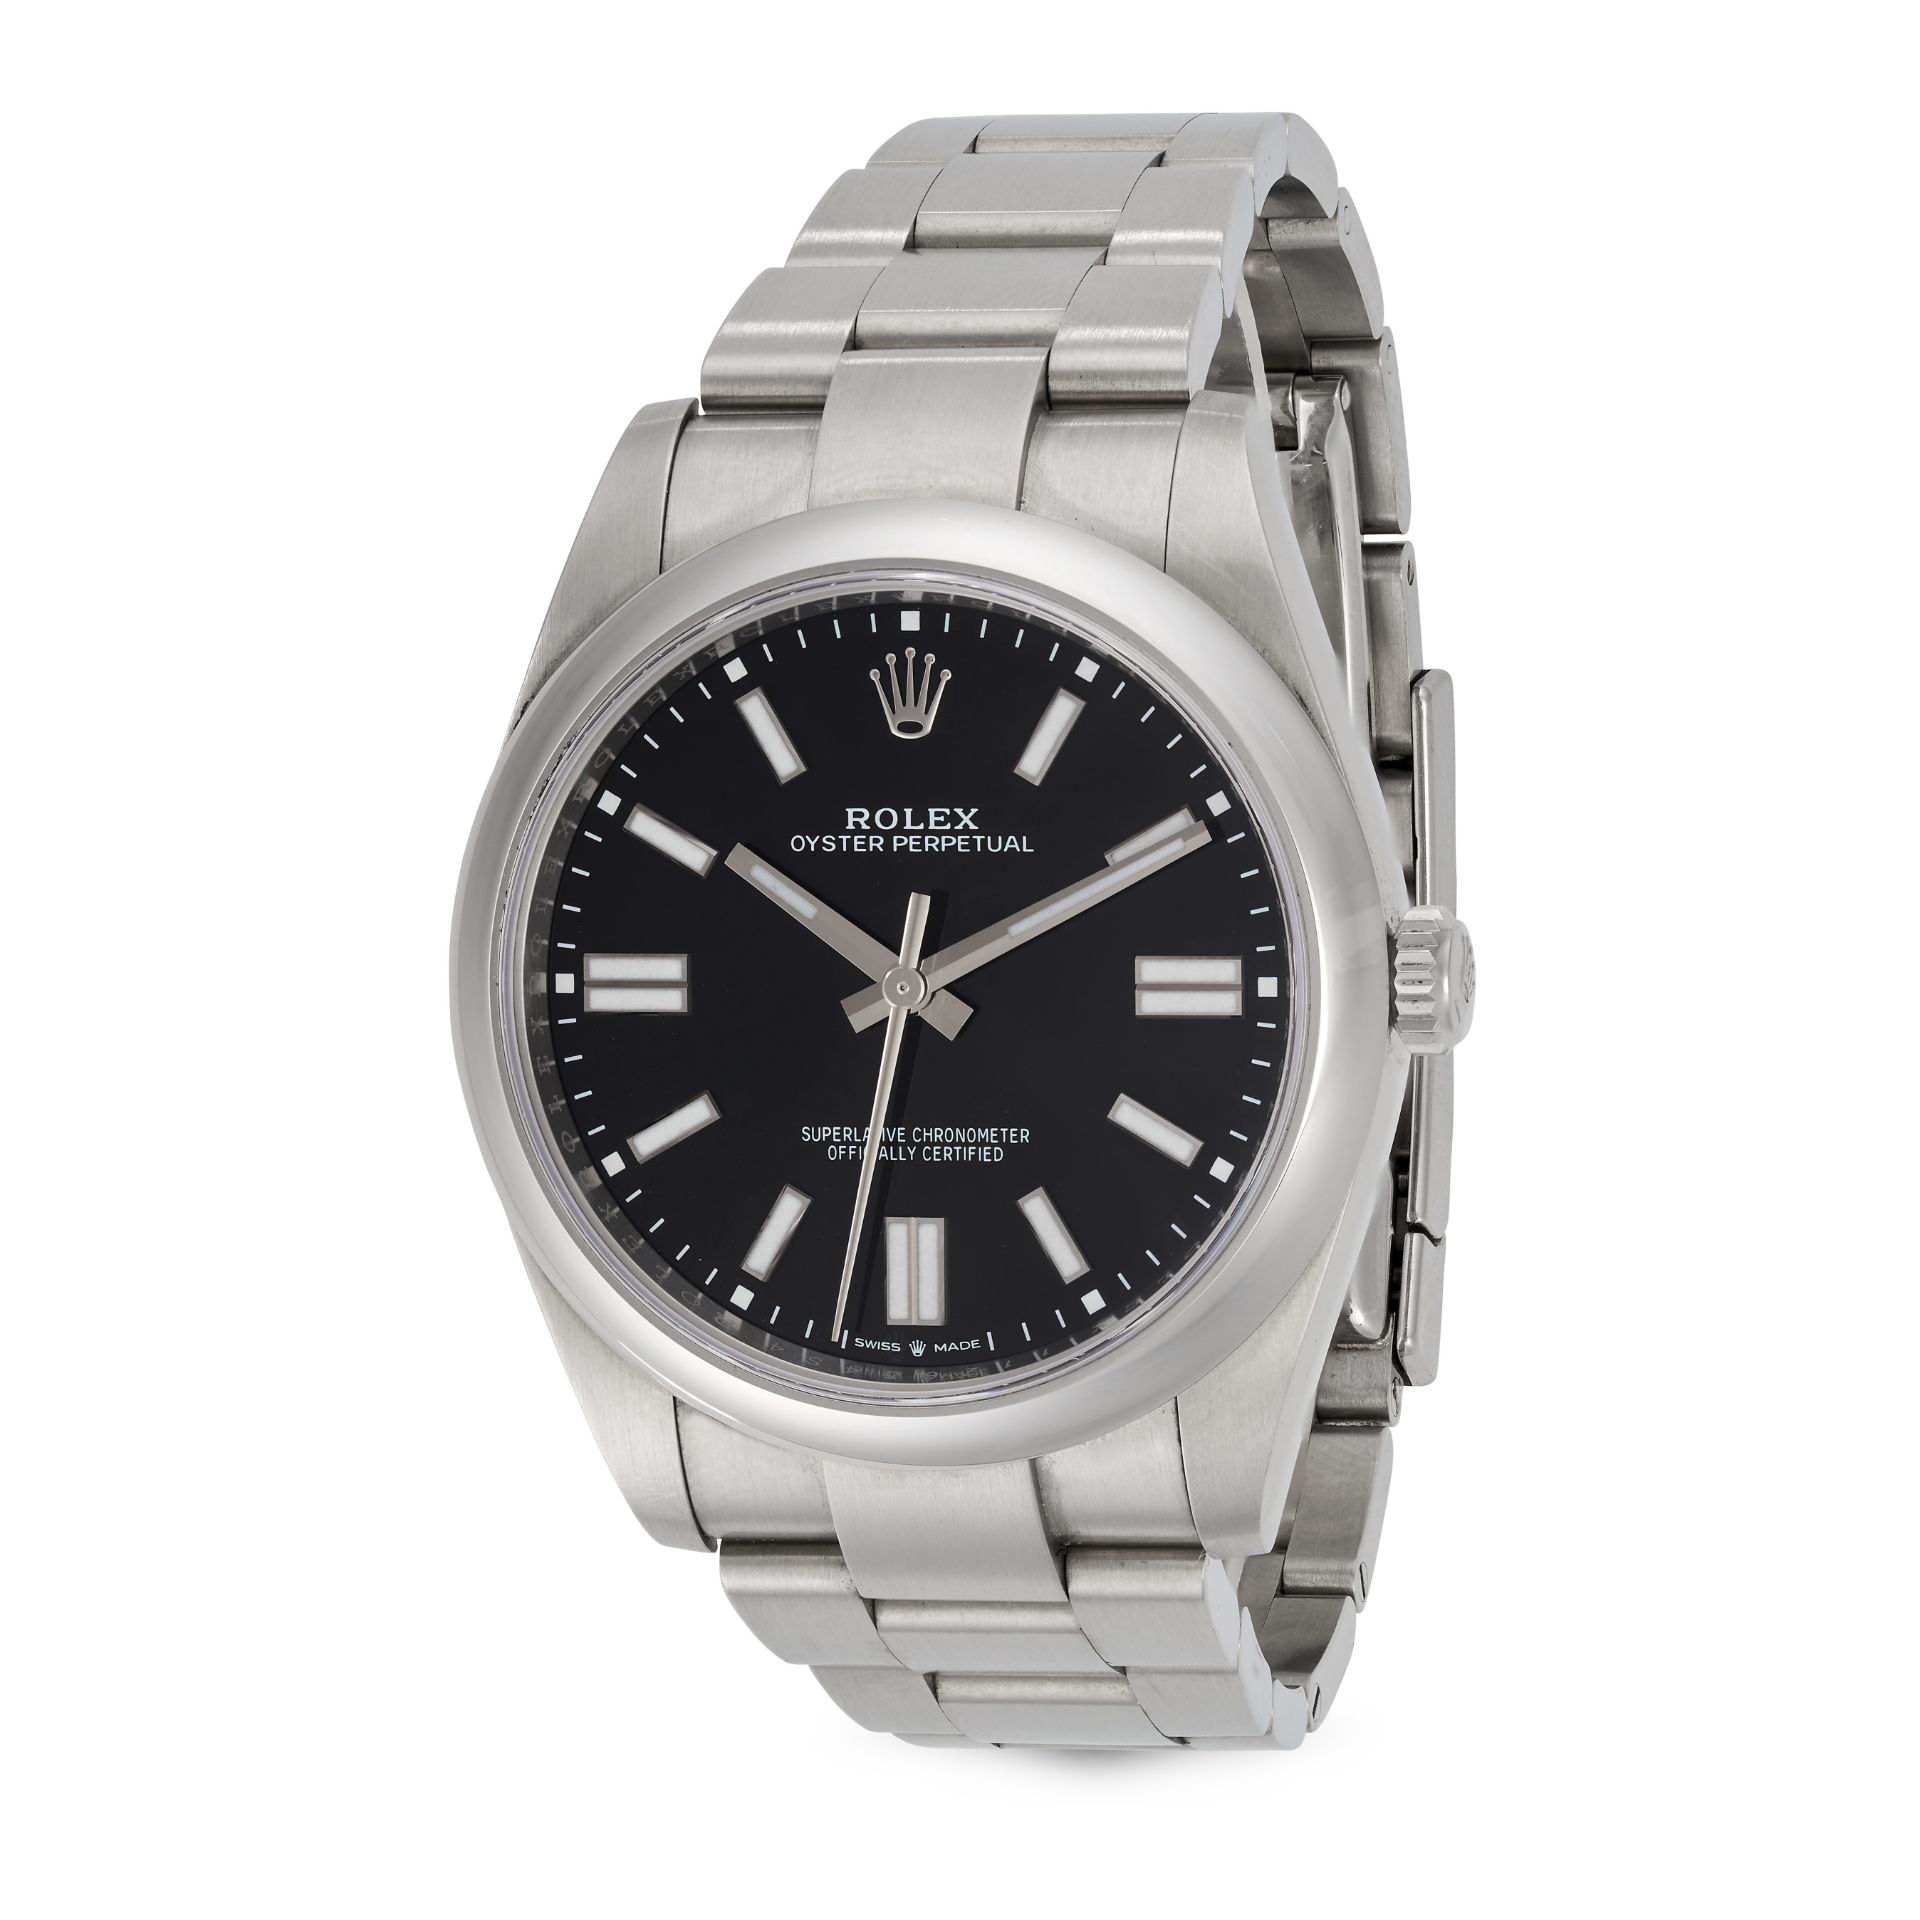 ROLEX - A ROLEX OYSTER PERPETUAL 41 AUTOMATIC WRISTWATCH in stainless steel, 124300, 11Z6XXXX, c....